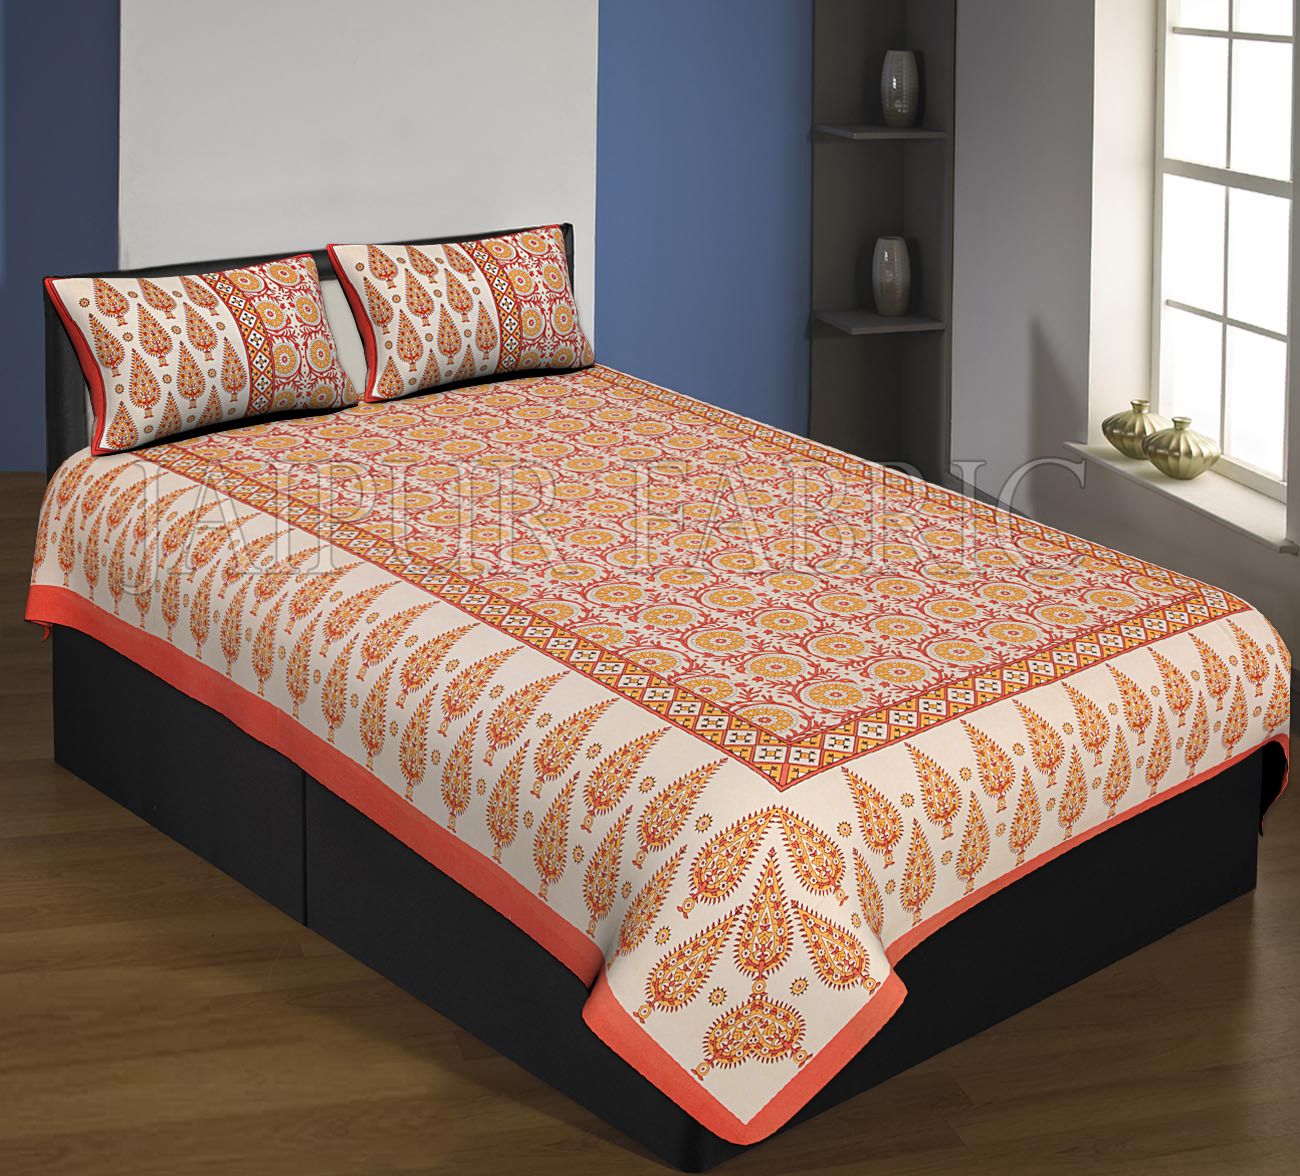 Orange Boarder Cream Base With Yellow Leaf And Flower Pattern Single Bed Sheet With 2 Pillow Cover